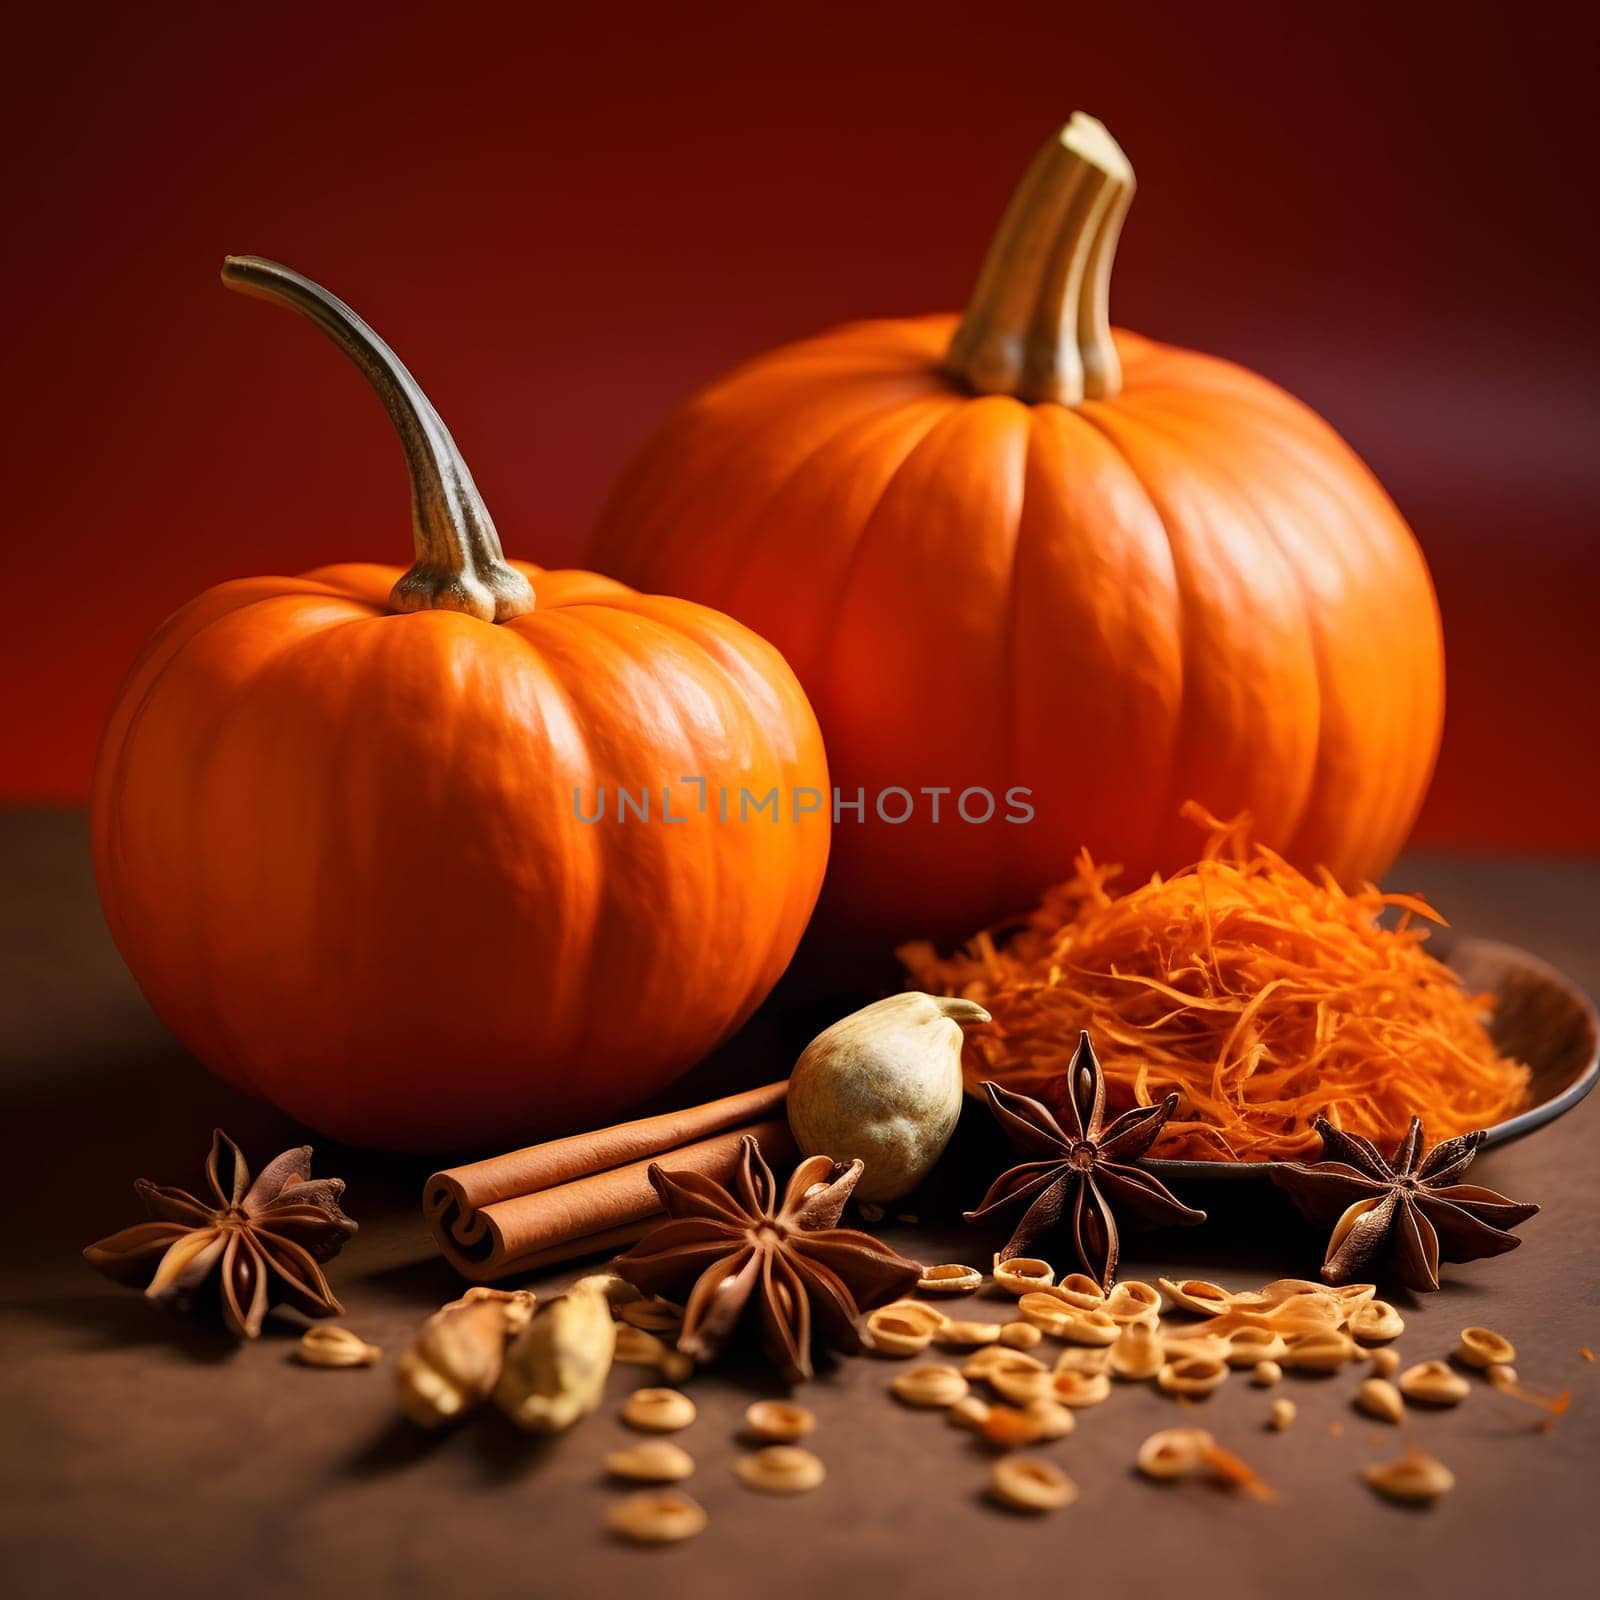 Elegantly arranged pumpkins. Around pumpkin scrapings on a dark background. Pumpkin as a dish of thanksgiving for the harvest. by ThemesS